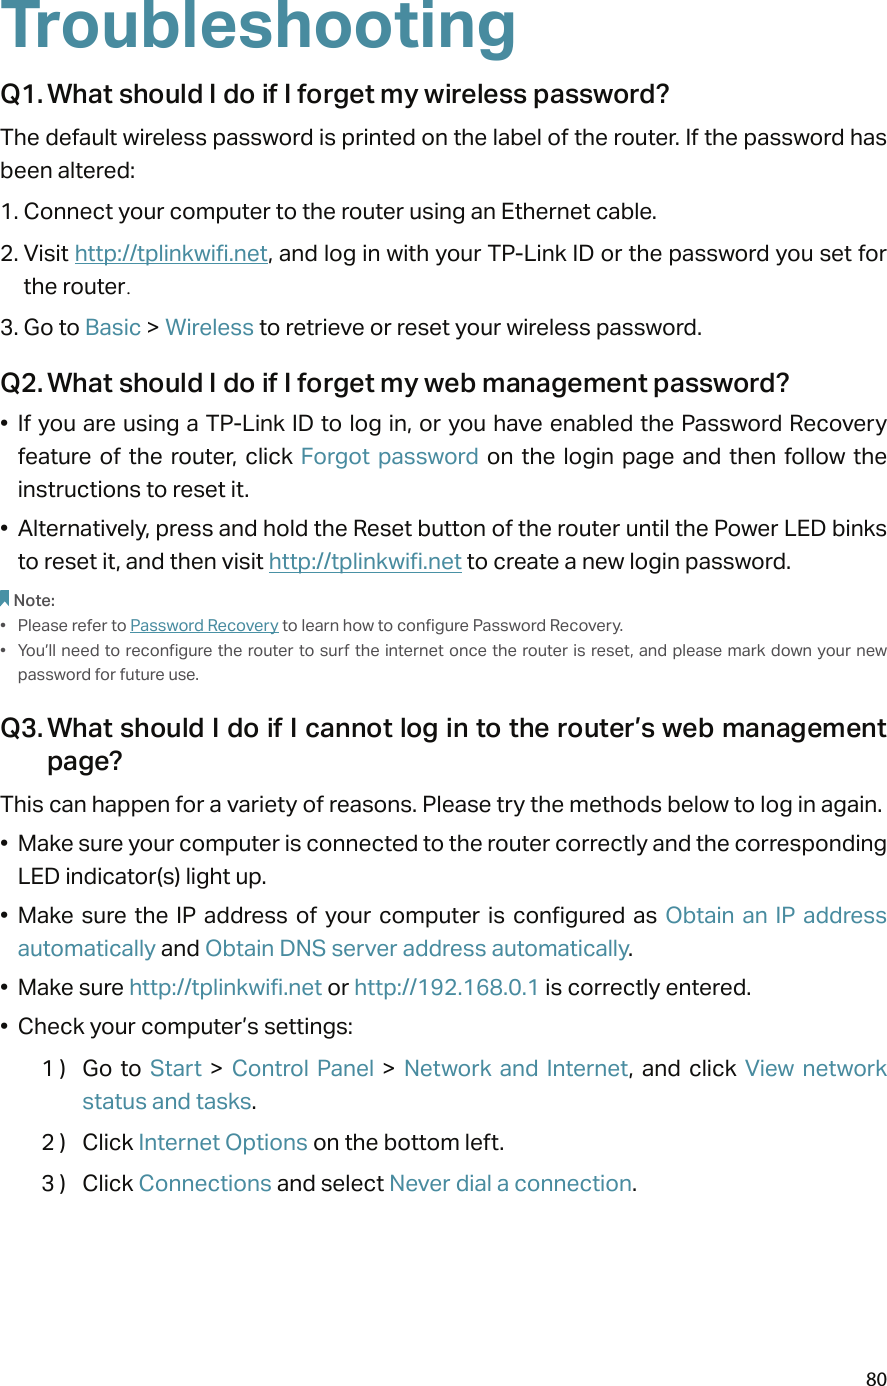 80TroubleshootingQ1. What should I do if I forget my wireless password?The default wireless password is printed on the label of the router. If the password has been altered:1. Connect your computer to the router using an Ethernet cable. 2. Visit http://tplinkwifi.net, and log in with your TP-Link ID or the password you set for the router.3. Go to Basic &gt; Wireless to retrieve or reset your wireless password.Q2. What should I do if I forget my web management password?•  If you are using a TP-Link ID to log in, or you have enabled the Password Recovery feature of  the  router,  click  Forgot  password  on  the  login  page  and  then  follow  the instructions to reset it.•  Alternatively, press and hold the Reset button of the router until the Power LED binks to reset it, and then visit http://tplinkwifi.net to create a new login password.Note: •  Please refer to Password Recovery to learn how to configure Password Recovery.•  You’ll need to reconfigure the router to surf the internet once the router is reset, and please mark  down your new password for future use.Q3. What should I do if I cannot log in to the router’s web management page?This can happen for a variety of reasons. Please try the methods below to log in again.•  Make sure your computer is connected to the router correctly and the corresponding LED indicator(s) light up.•  Make sure the  IP address  of  your  computer is  configured  as  Obtain an  IP  address automatically and Obtain DNS server address automatically.•  Make sure http://tplinkwifi.net or http://192.168.0.1 is correctly entered.•  Check your computer’s settings:1 )  Go  to Start  &gt;  Control  Panel  &gt;  Network  and  Internet,  and  click  View  network status and tasks.2 )  Click Internet Options on the bottom left.3 )  Click Connections and select Never dial a connection.